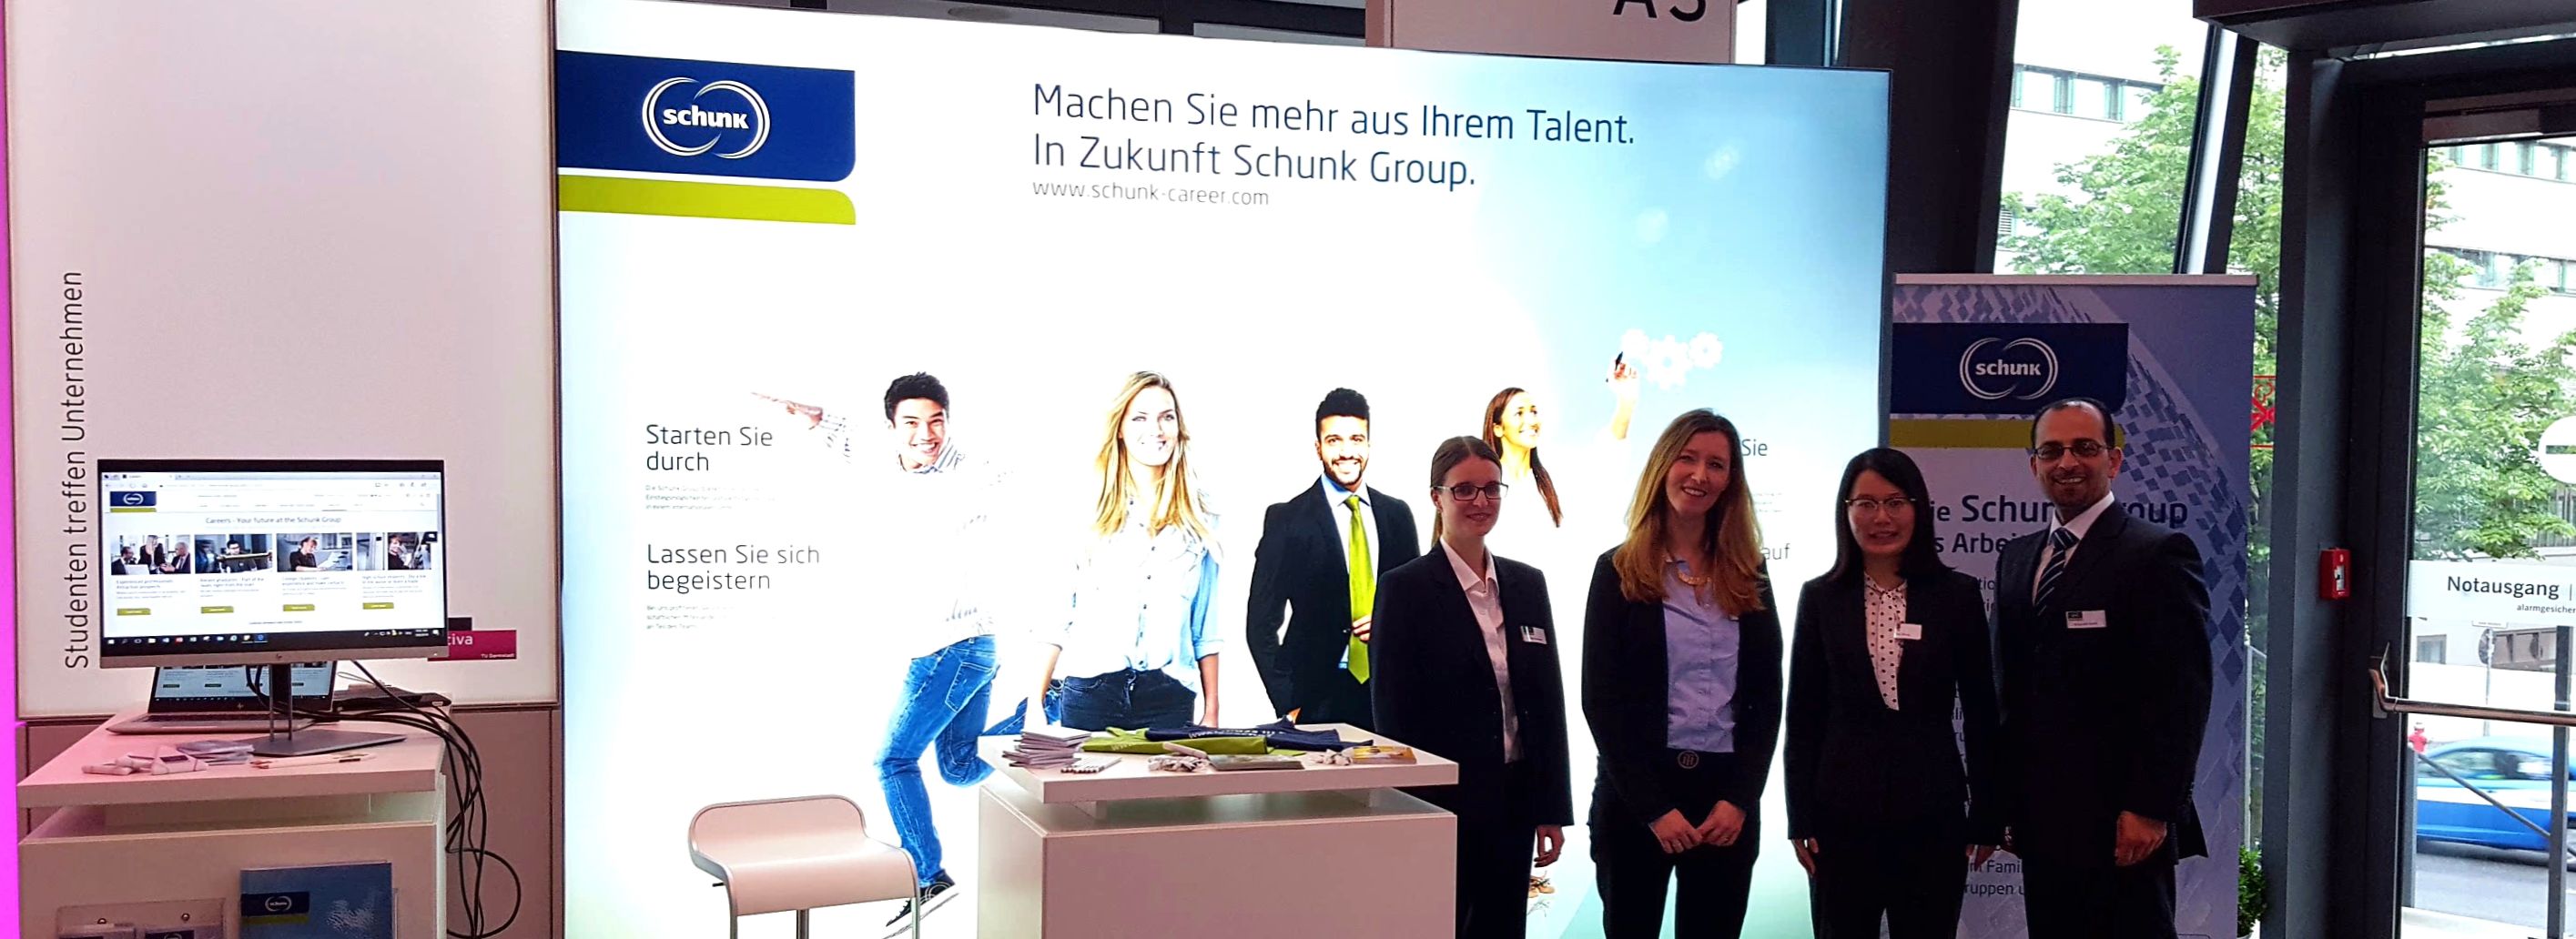 Schunk team at the university fair booth